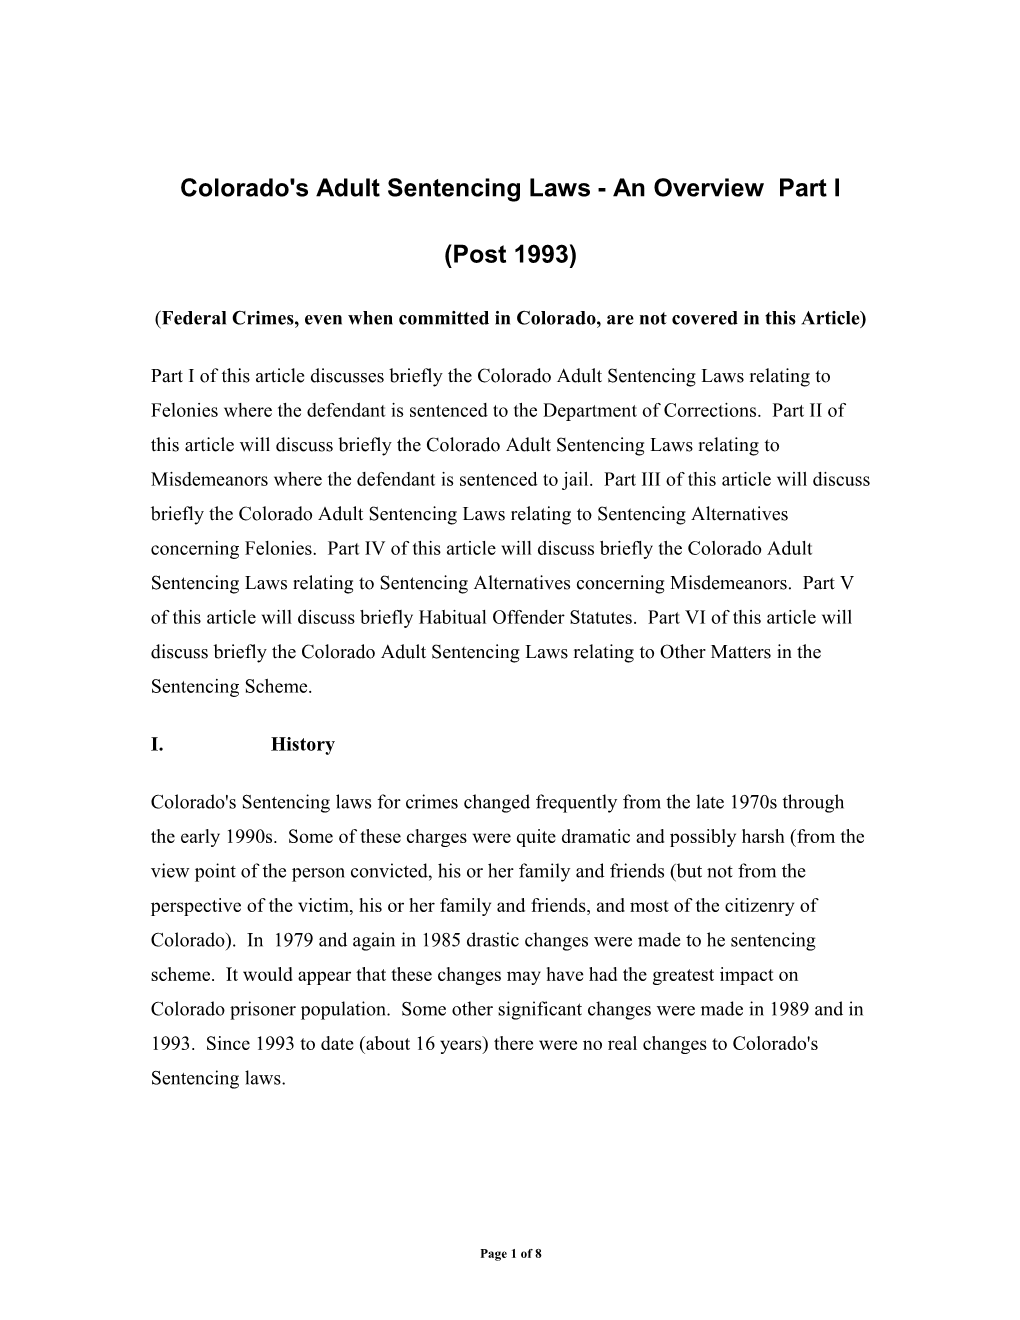 Colorado's Adult Sentencing Laws - an Overview